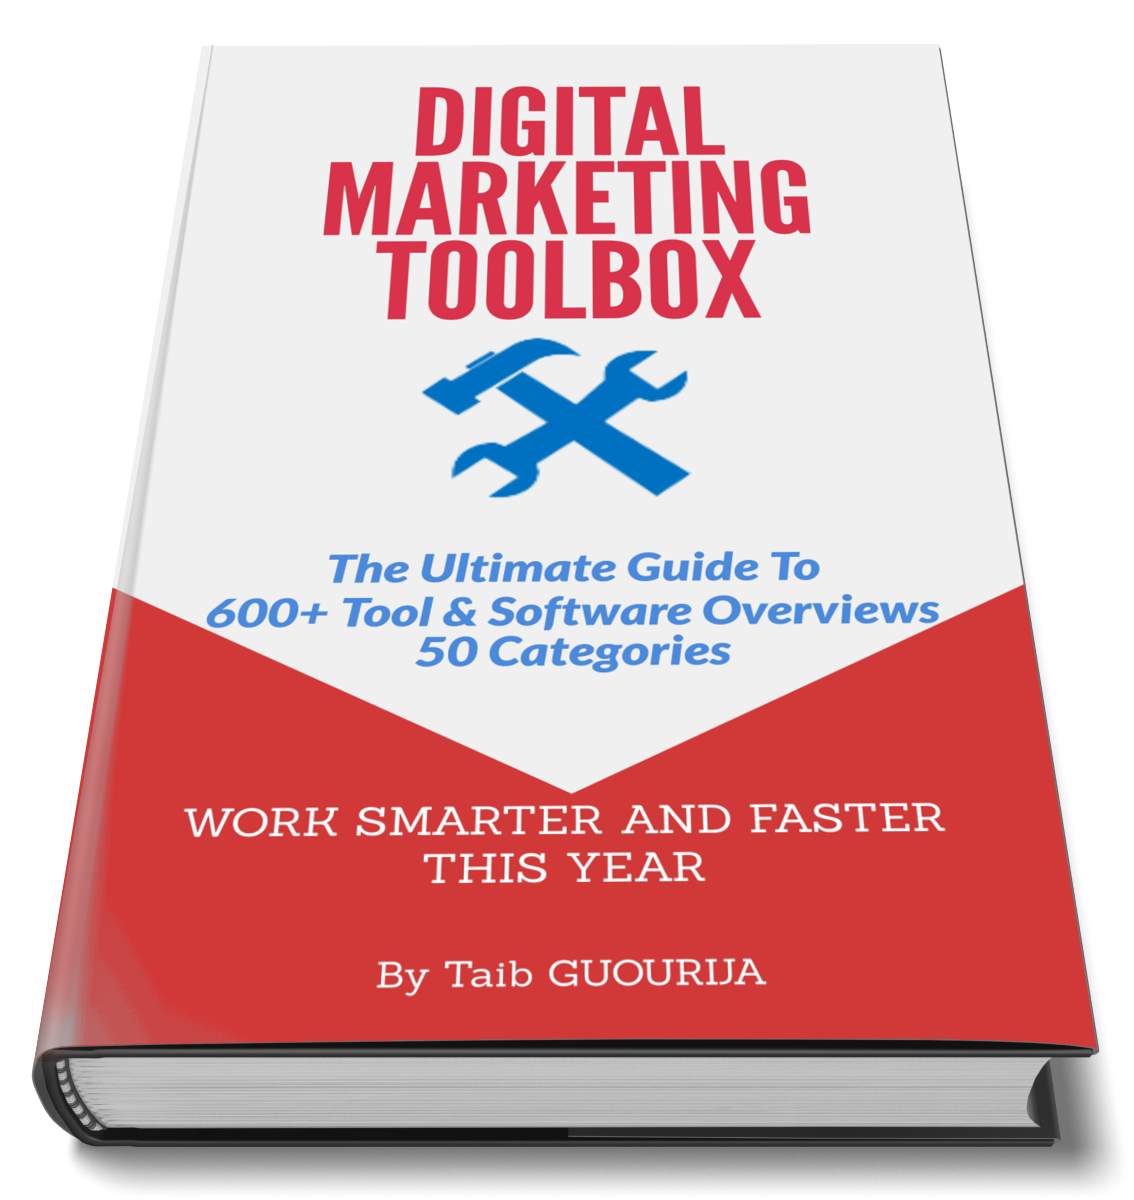 The Ultimate Guide To
600+ Tool &amp; Software Overviews
50 Categories

 

/ WORK SMARTER AND FASTER
THIS YEAR

| By Taib GUOURDA